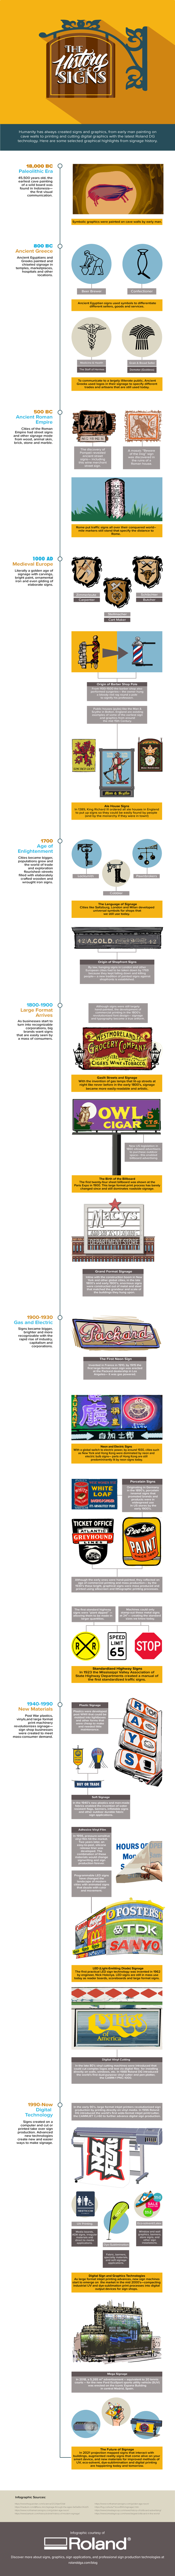 history of signs infographic